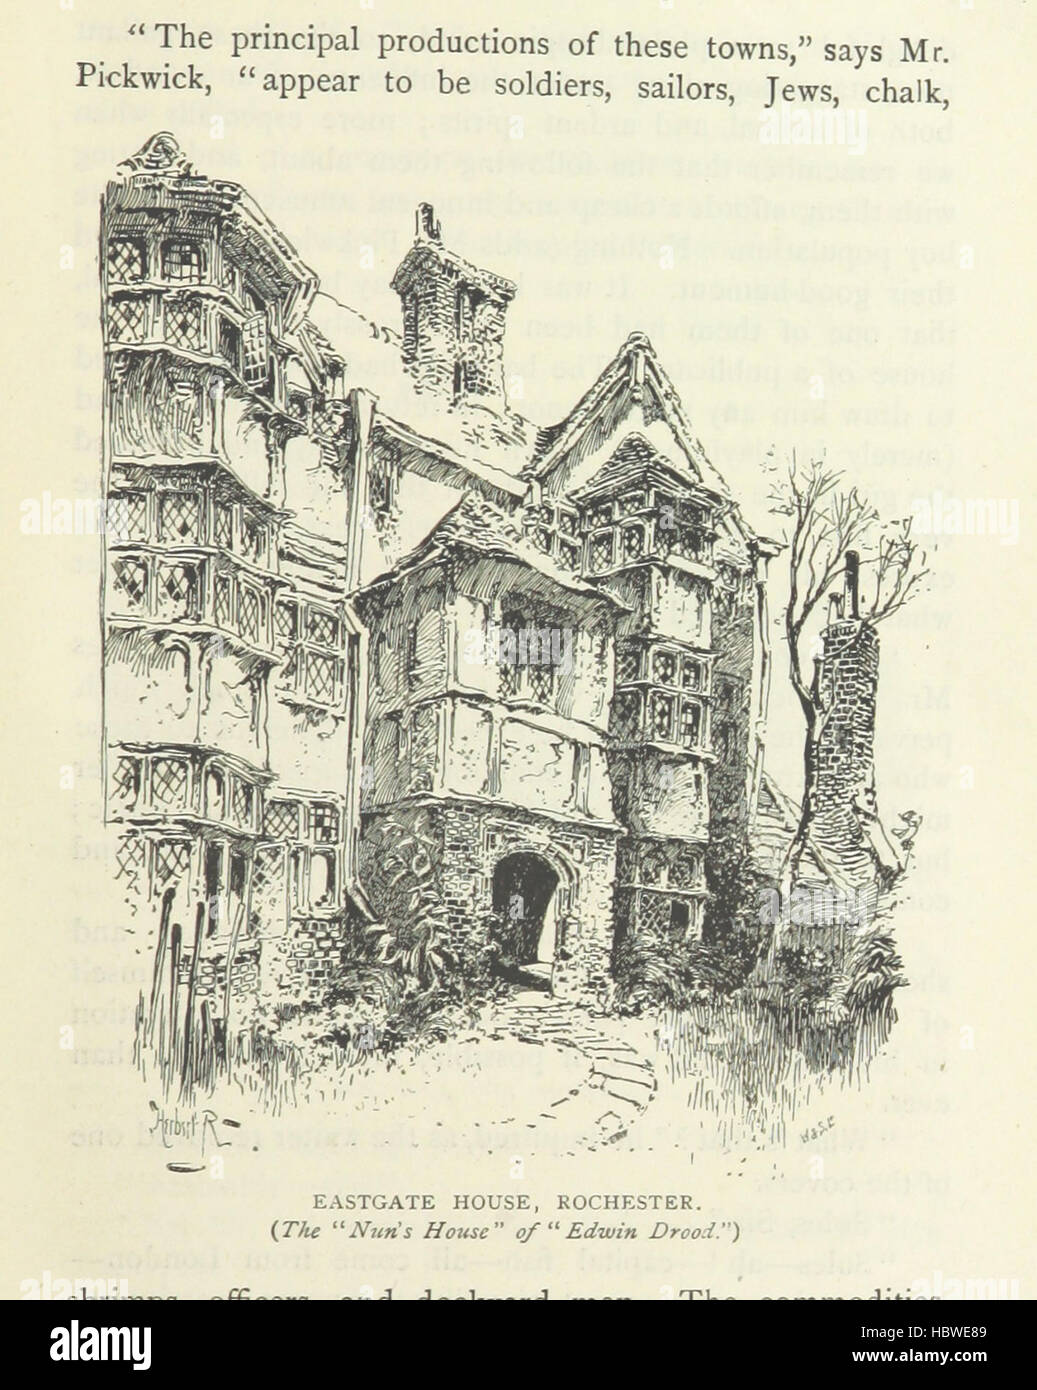 Image taken from page 75 of 'The Posthumous Papers of the Pickwick Club ... with notes and numerous illustrations. Edited by Charles Dickens, the younger. (The Jubilee edition.)' Image taken from page 75 of 'The Posthumous Papers of Stock Photo